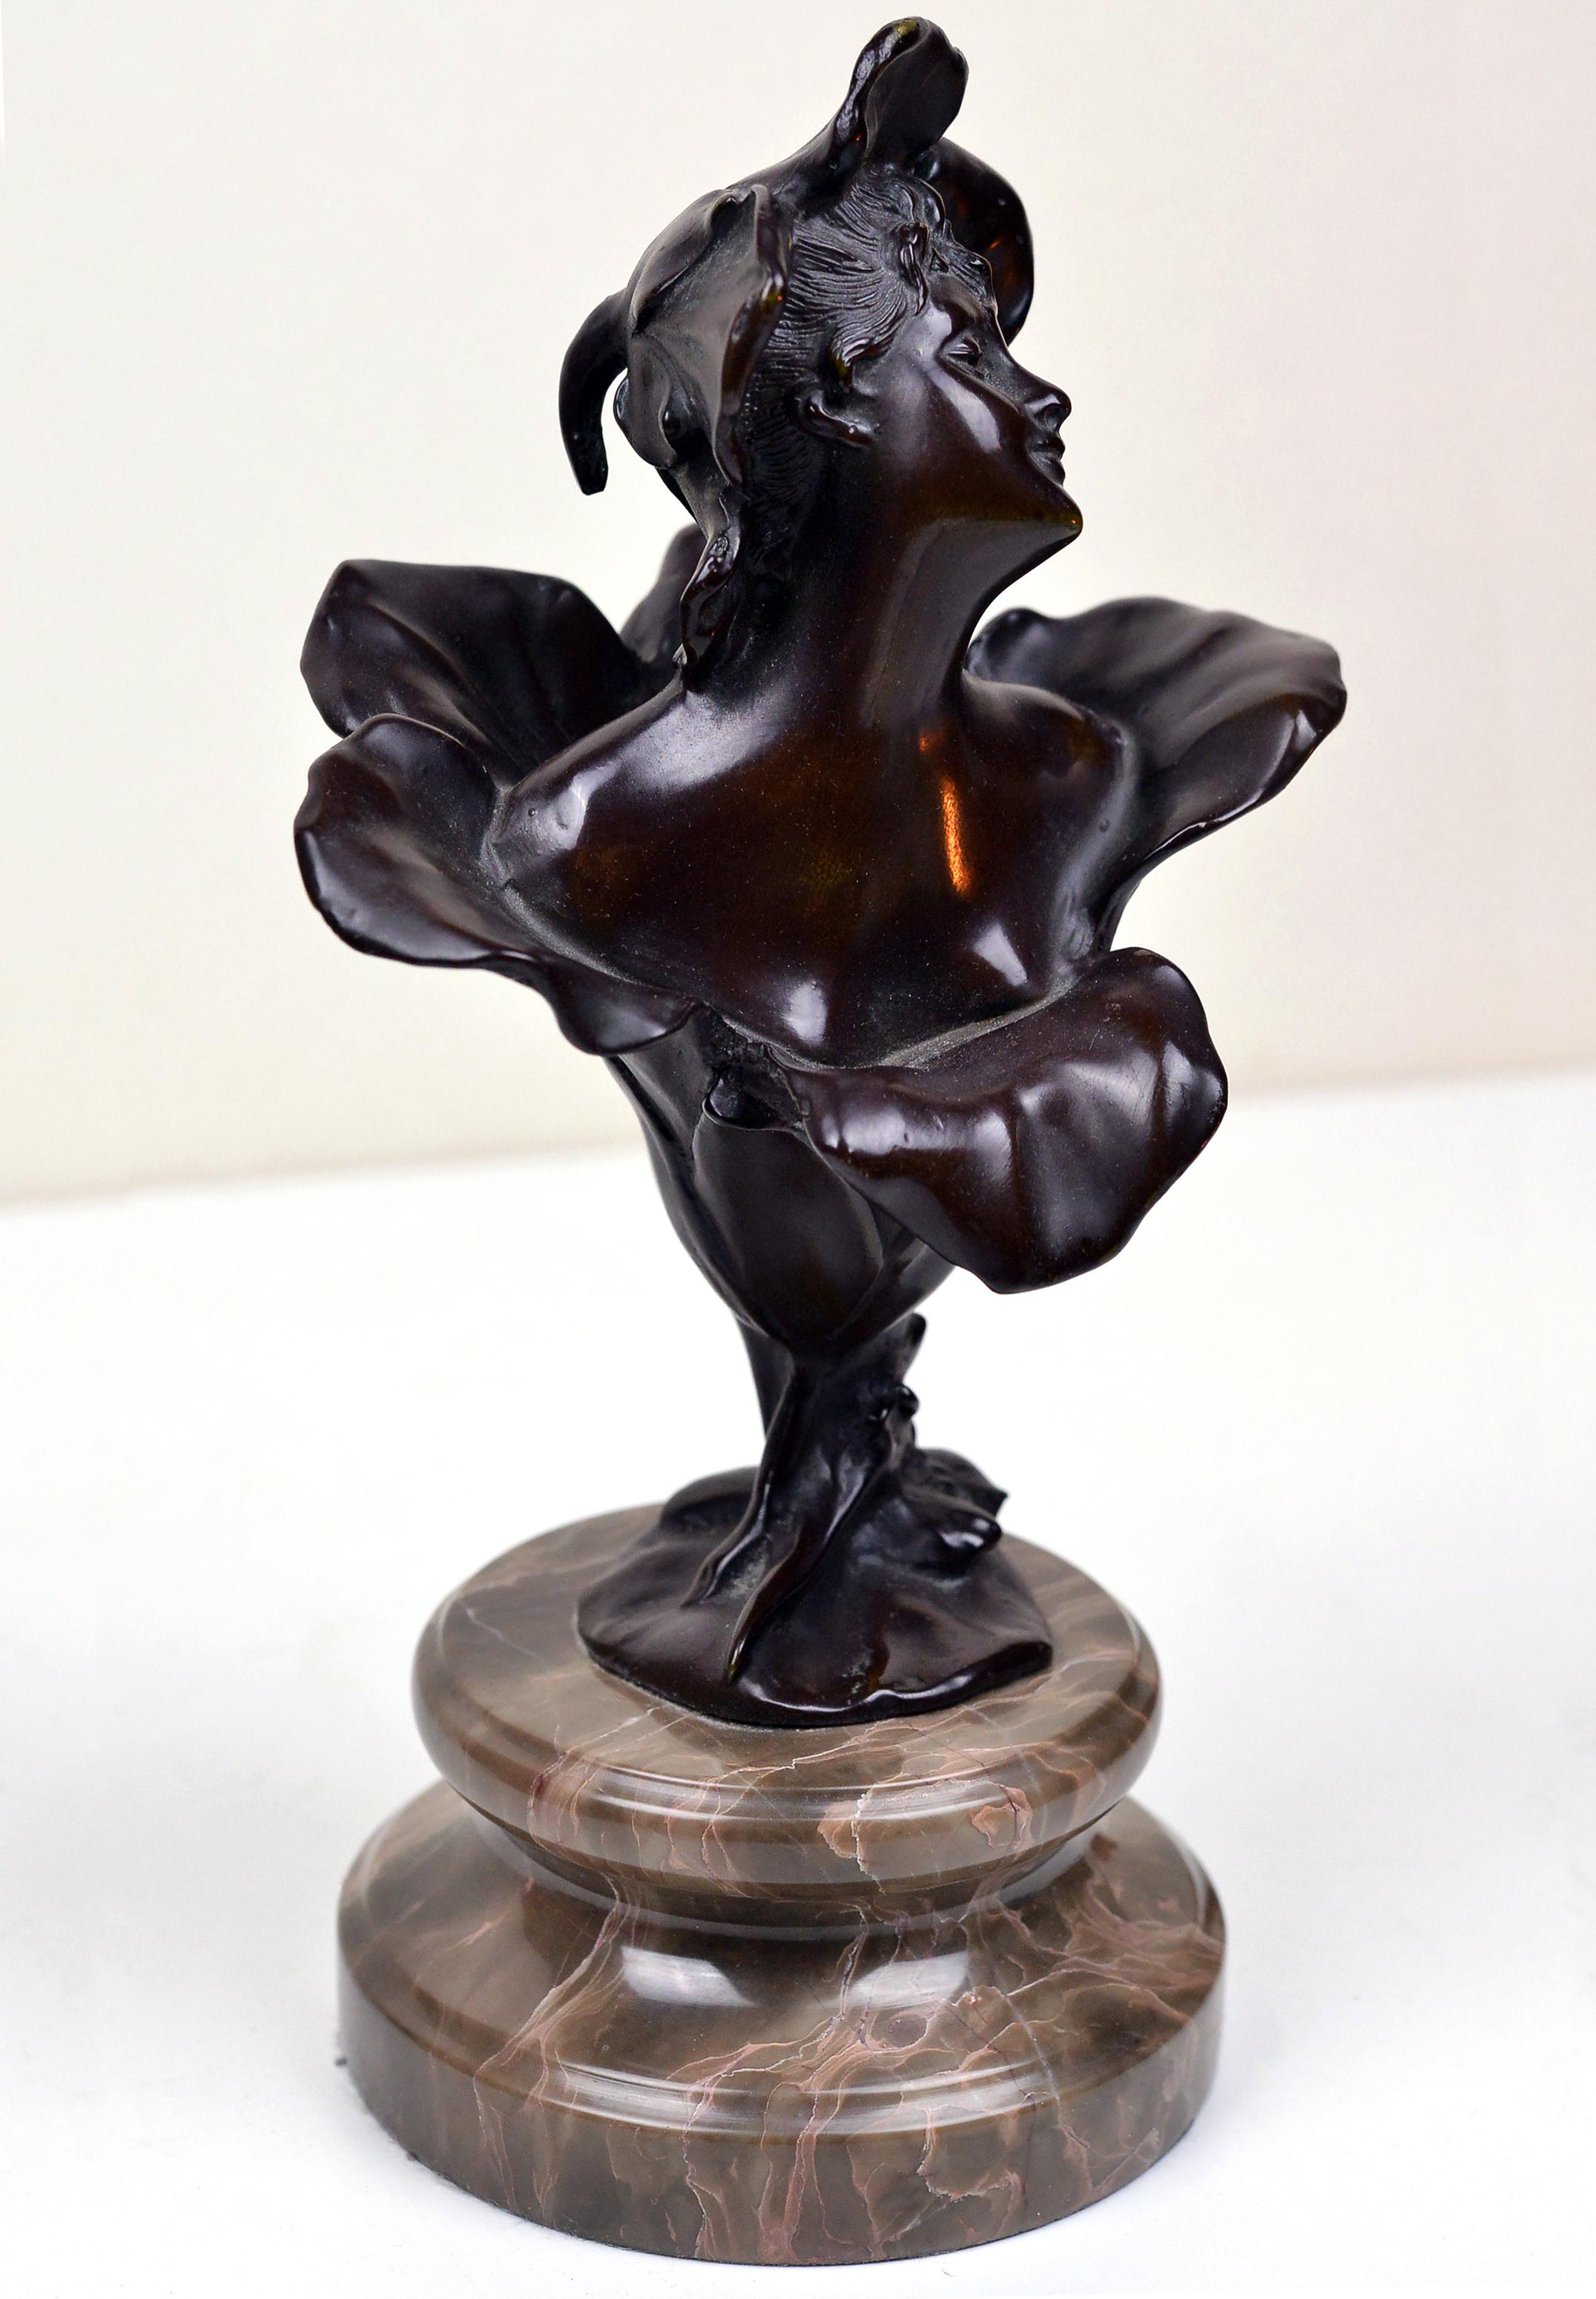 Figurine of Thumbelina Patinated Bronze n Stone Base 19th Century Art Nouveau In Good Condition For Sale In Sweden, SE